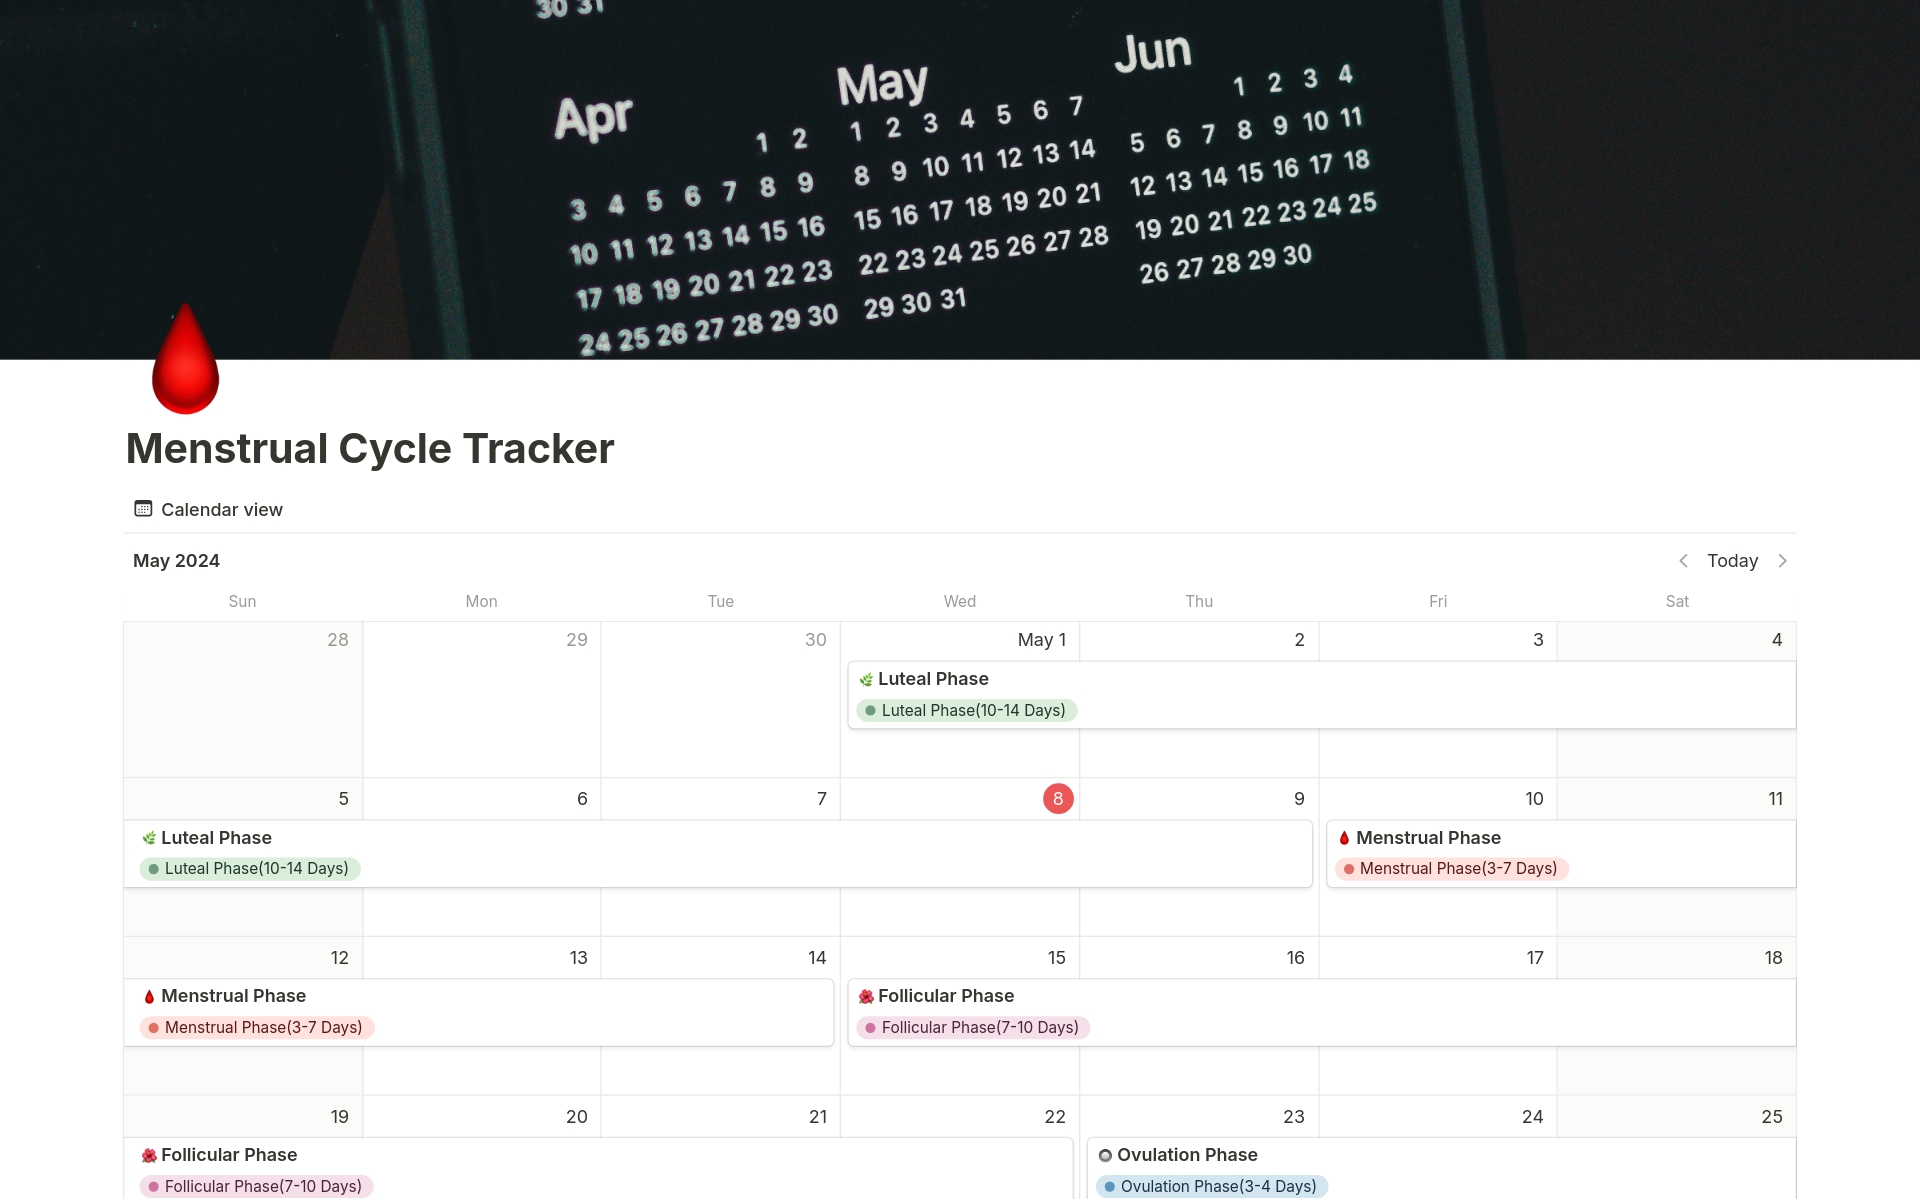 Gain control of your cycle! This customizable menstrual cycle tracker template for Notion helps you predict periods, track symptoms, and optimize your well-being throughout the month.